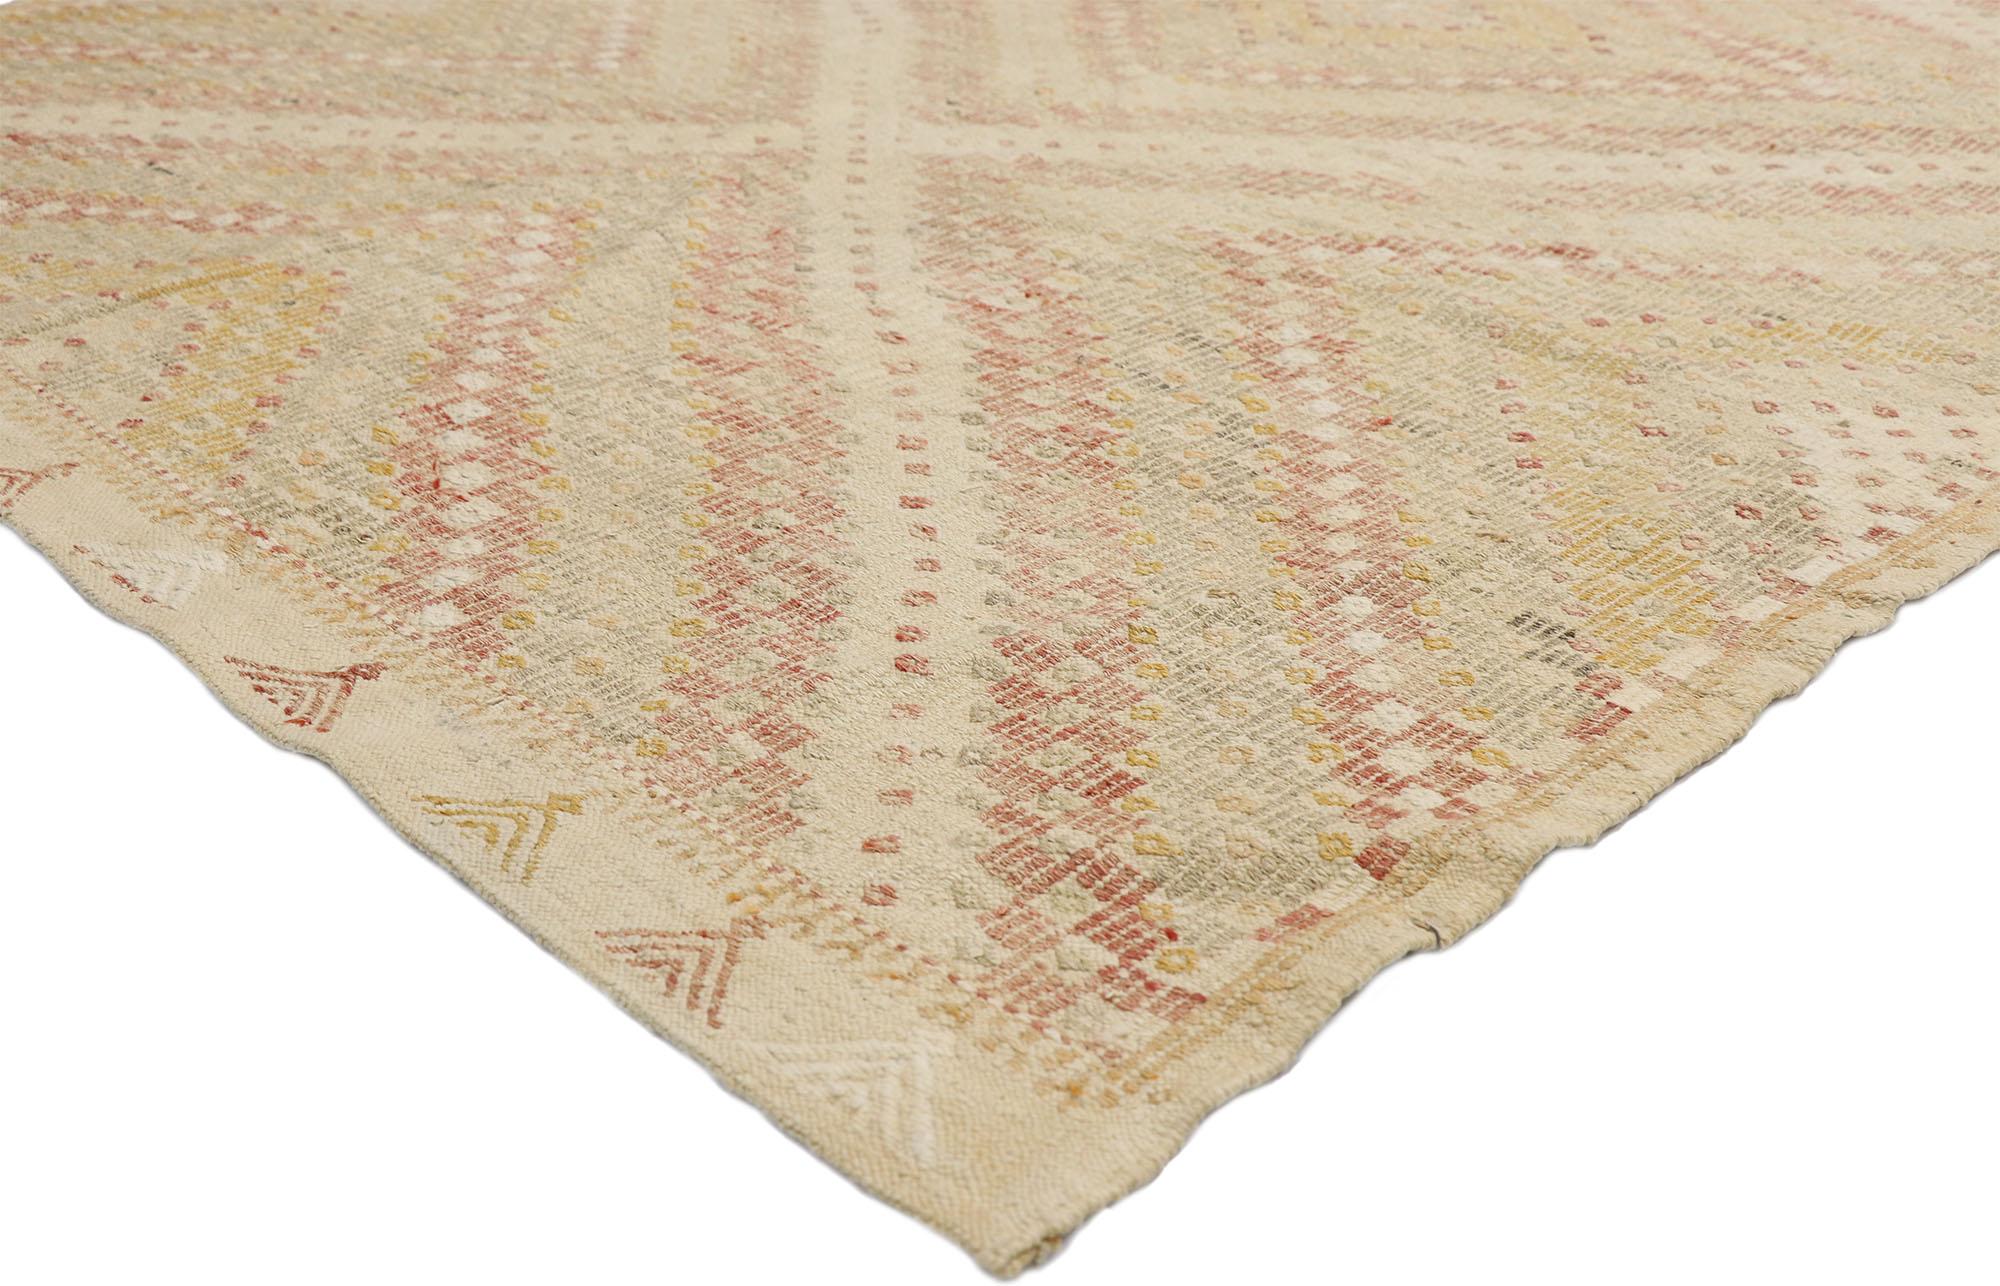 52562, distressed vintage Turkish Kilim rug with Southern Living British Colonial style. This handwoven wool vintage Turkish Kilim rug features a central diamond surrounded by additional striped bands creating an Expansion effect for the main